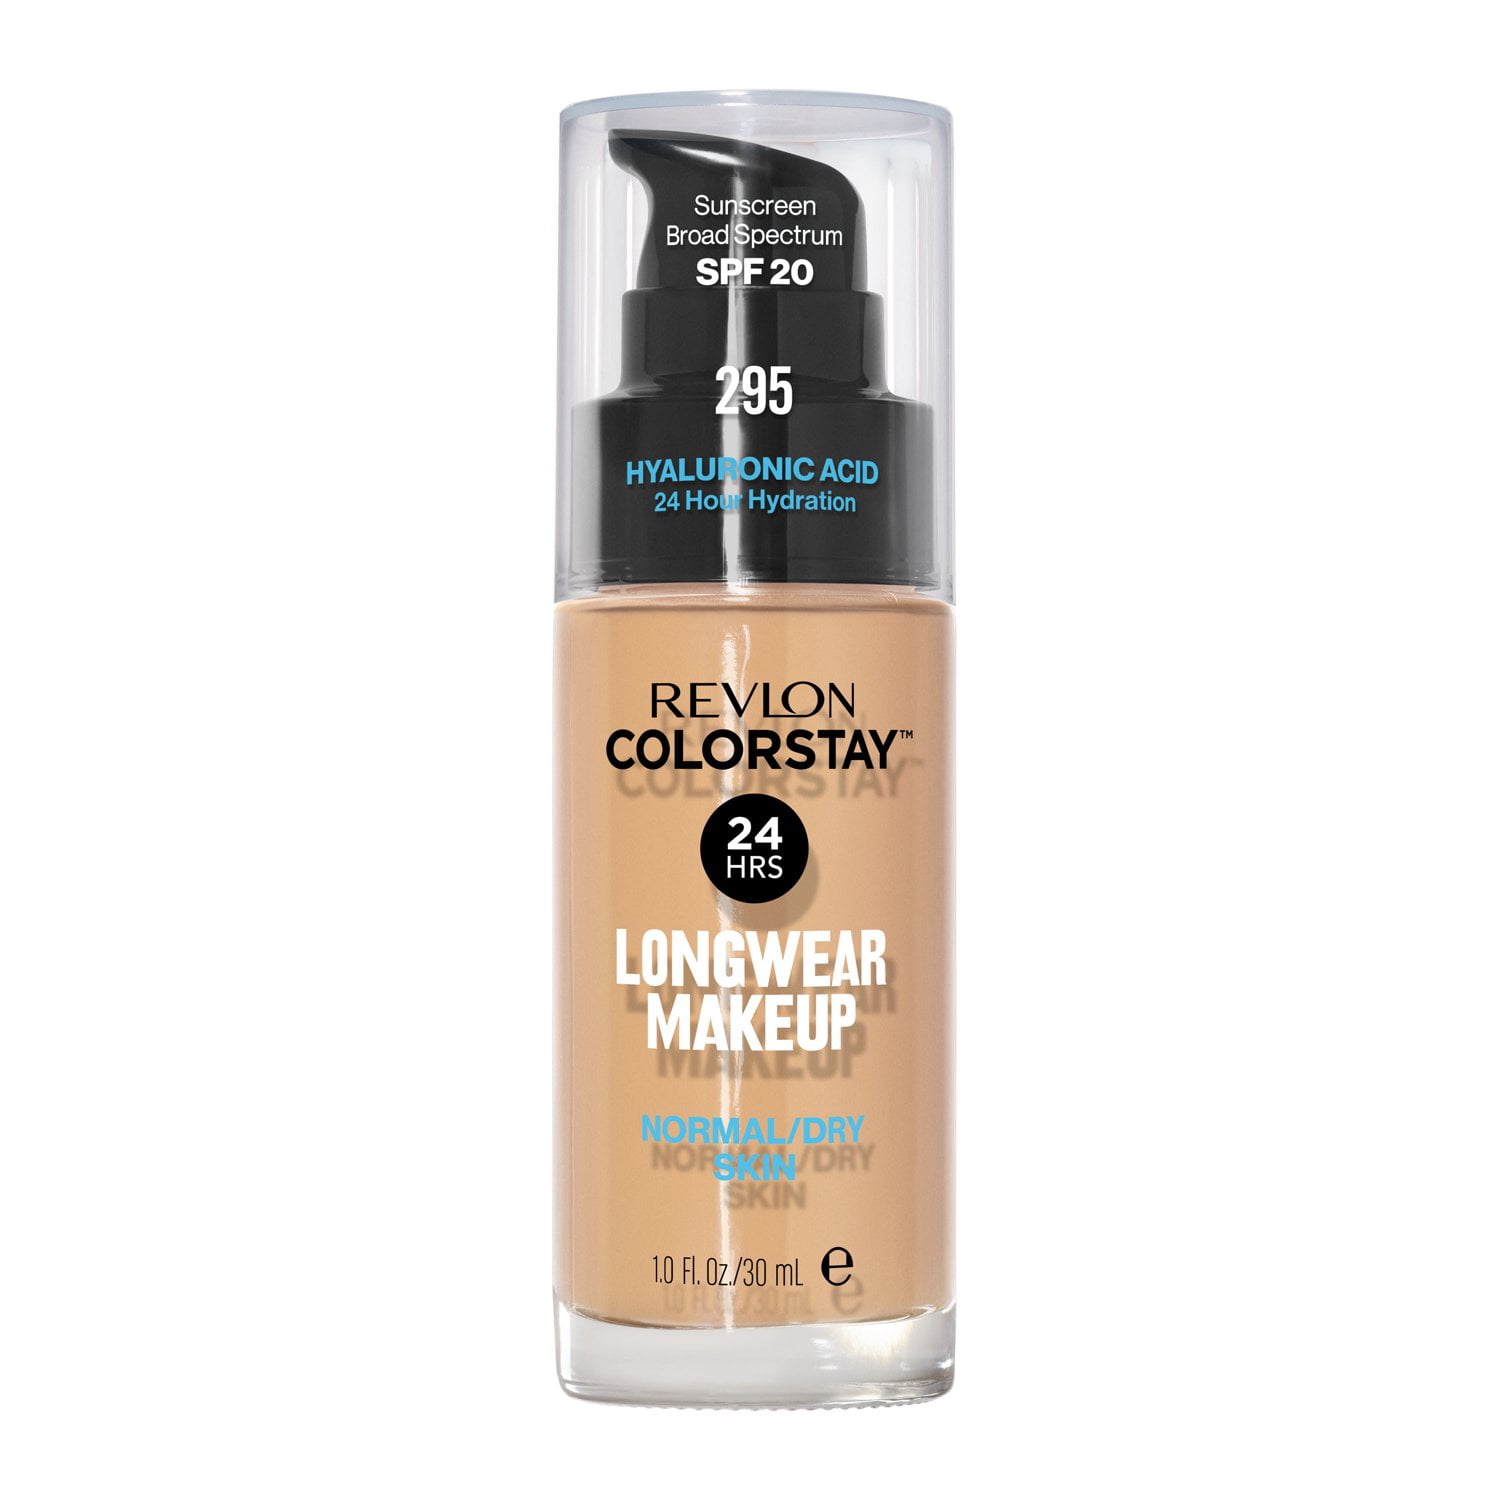 Revlon ColorStay Face Makeup for Normal and Dry Skin, SPF 20, Longwear  Medium-Full Coverage with Matte Finish, Oil Free, 180 Sand Beige